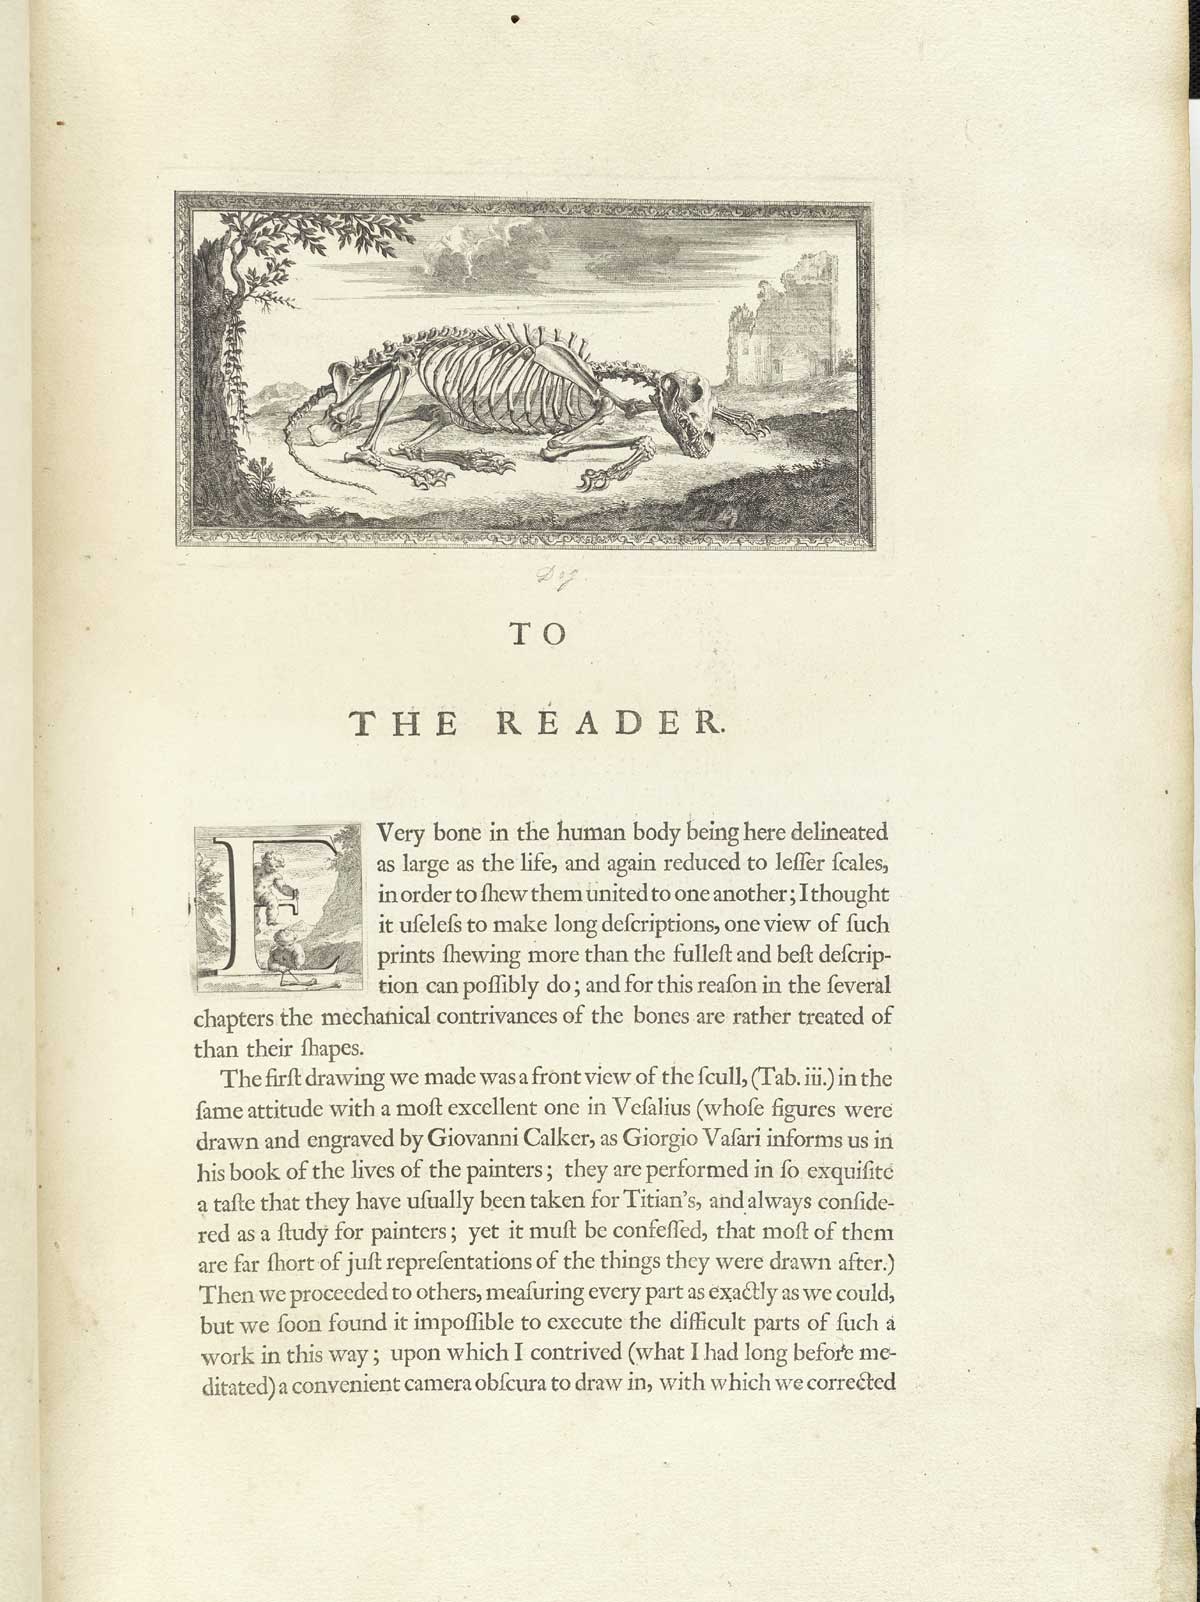 Typeset page of text entitled, 'To the Reader,' with a large engraved headpiece of a dog skeleton in a pastoral setting laying down asleep with its head pointing to the right of the image; from William Cheselden’s Osteographia, NLM Call no.: WZ 260 C499o 1733.